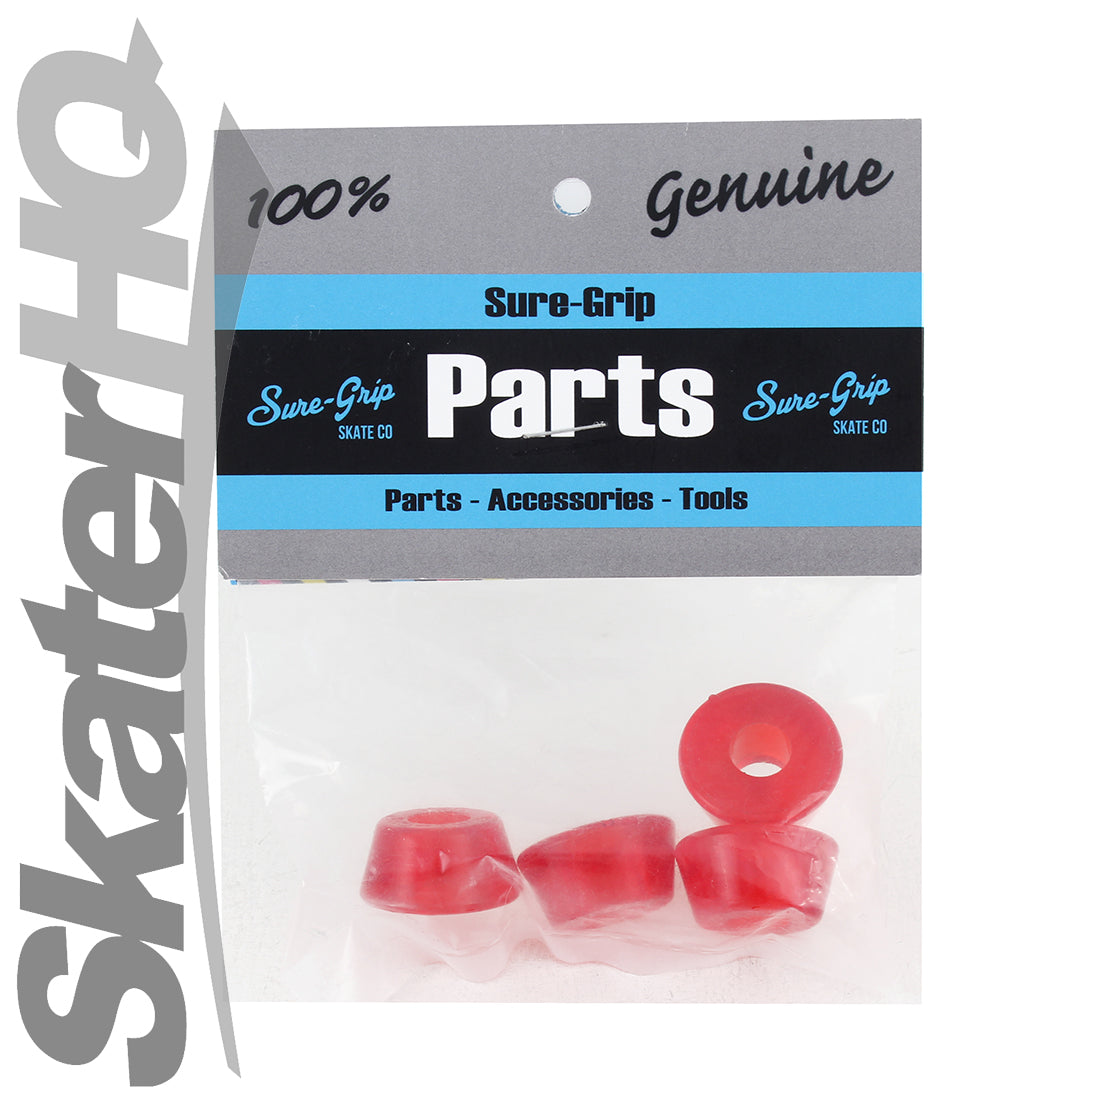 Sure-Grip Conical Cushions 93a 4pk - Red Roller Skate Hardware and Parts